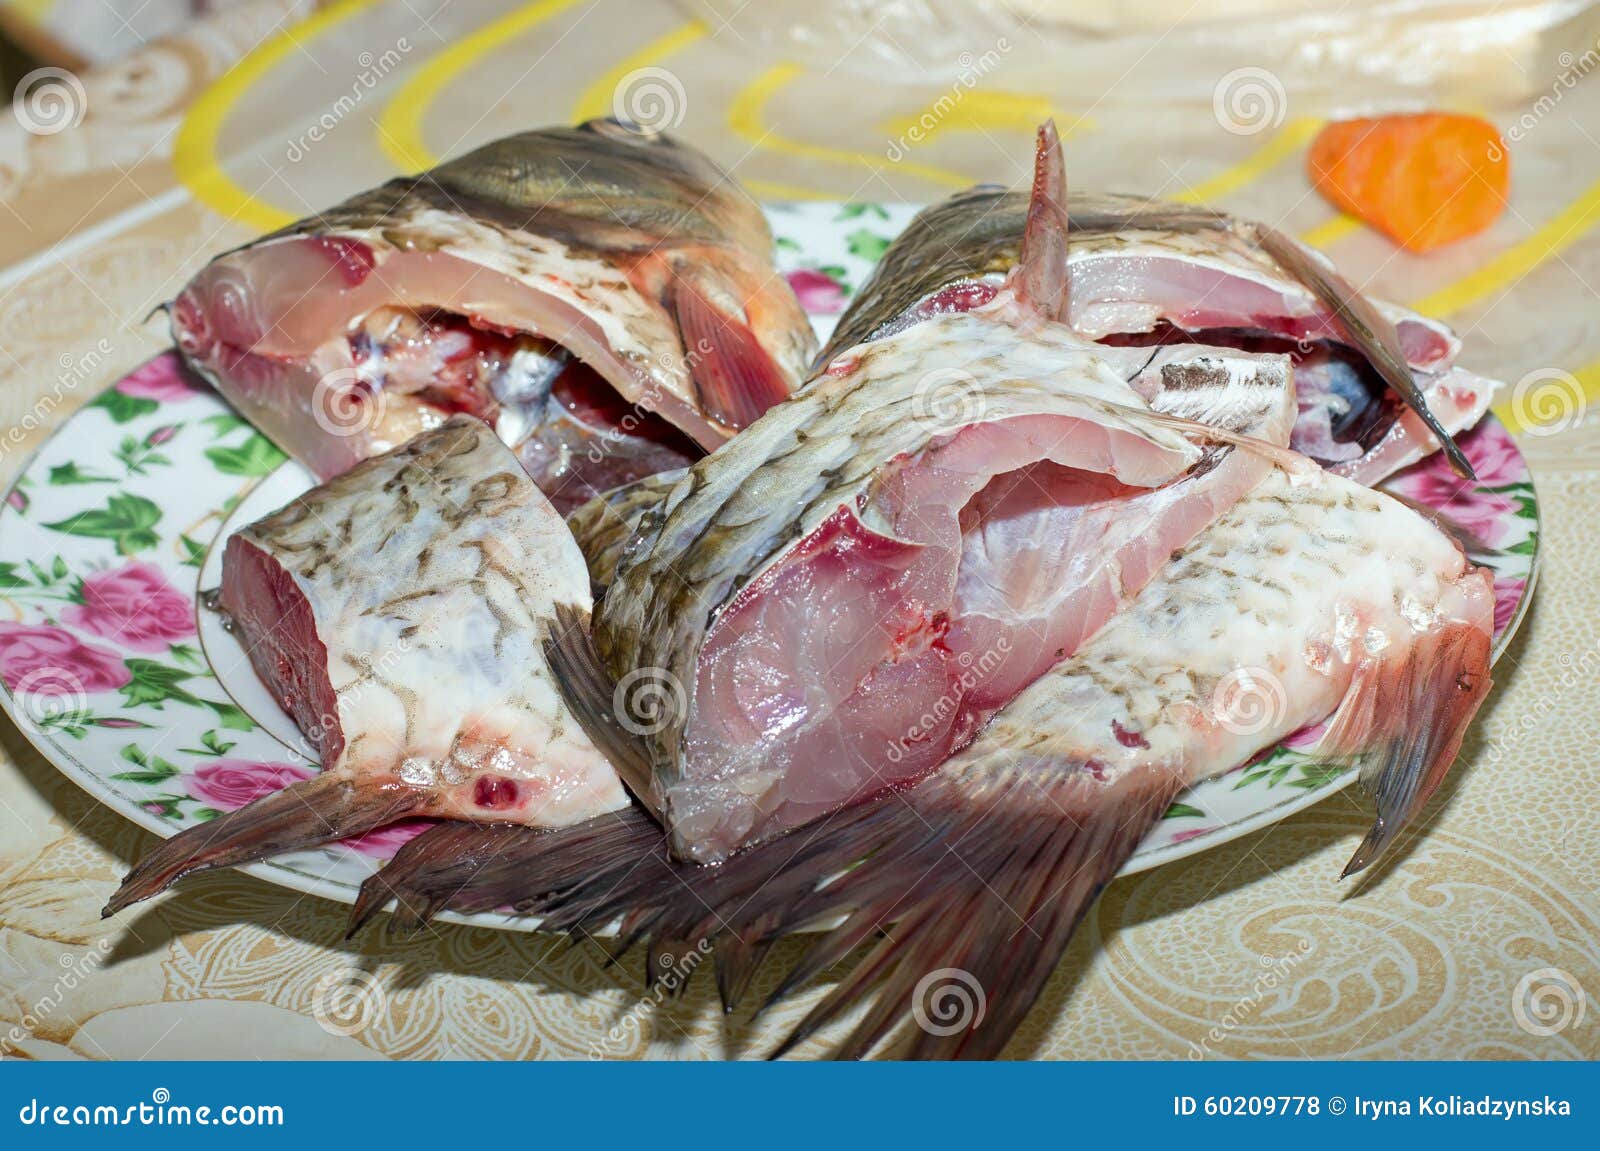 Raw Fish Cut Into Slices On A Plate, Cooking, Food Stock Photo - Image